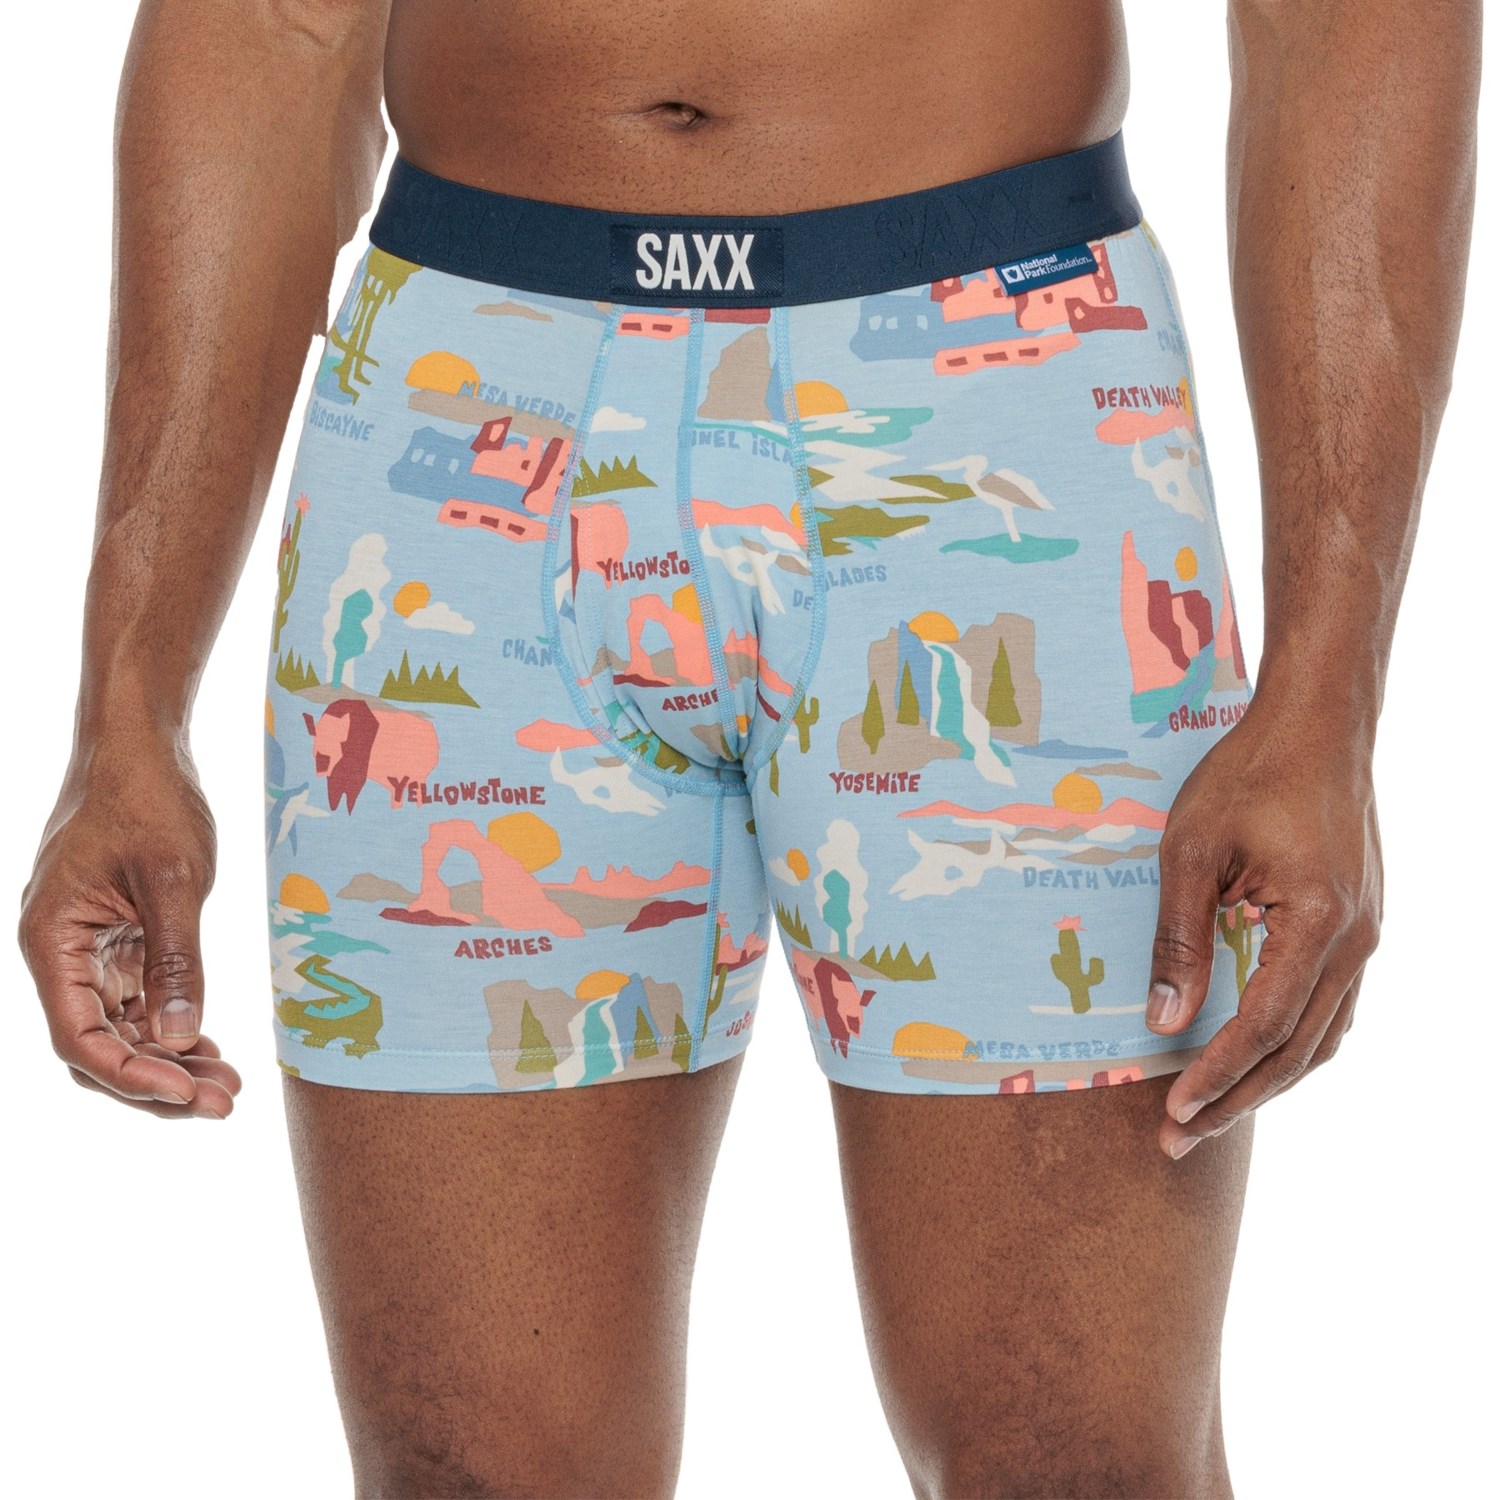 Saxx Men's Underwear - Ultra Super Soft Boxer Briefs with Fly and